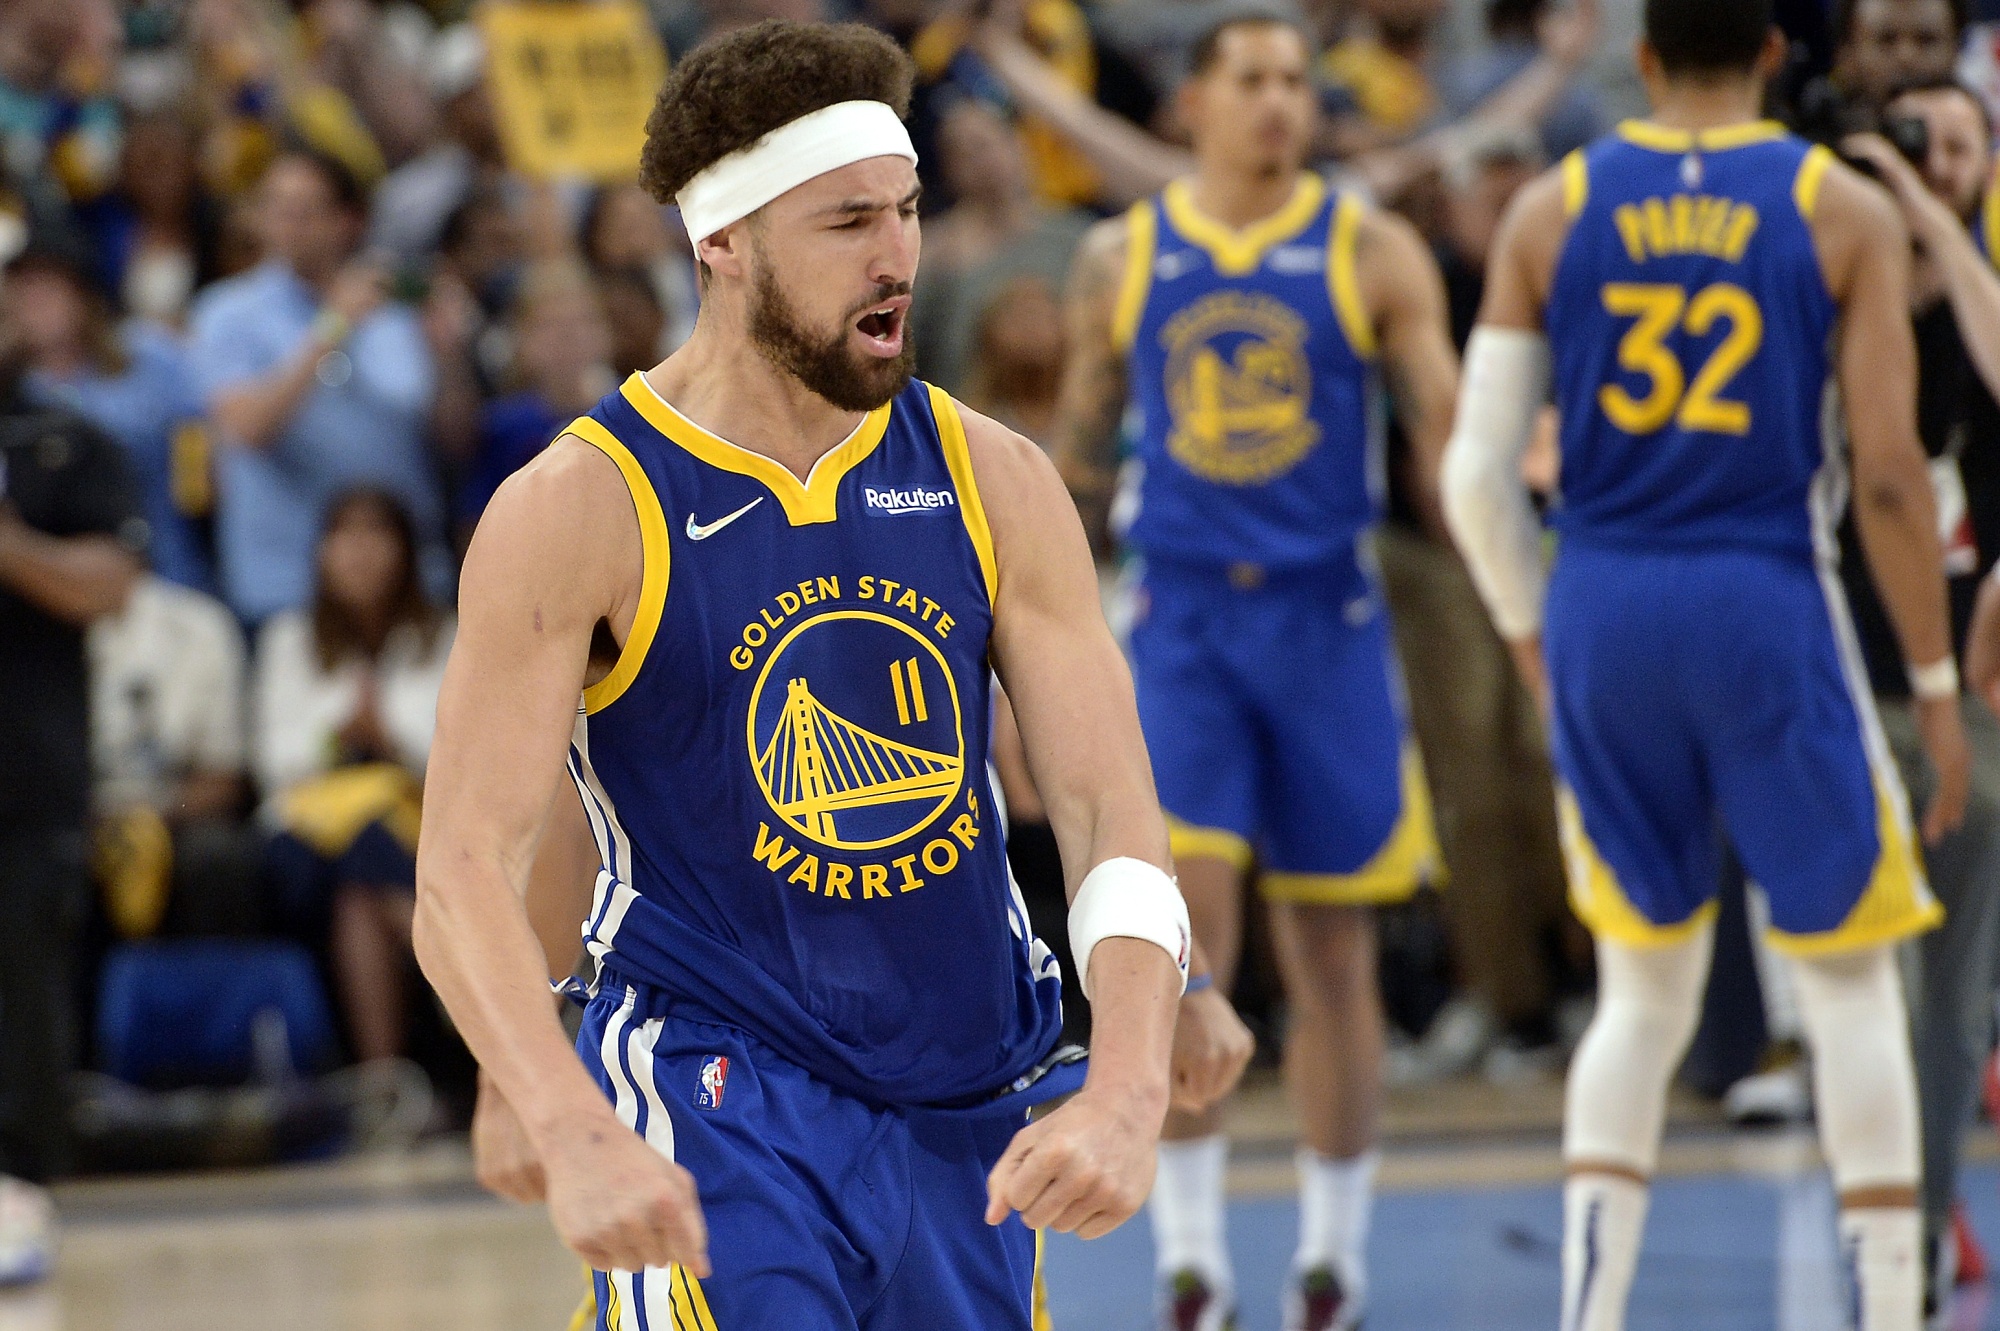 Warriors' Klay Thompson has advice for Jordan Poole after rough